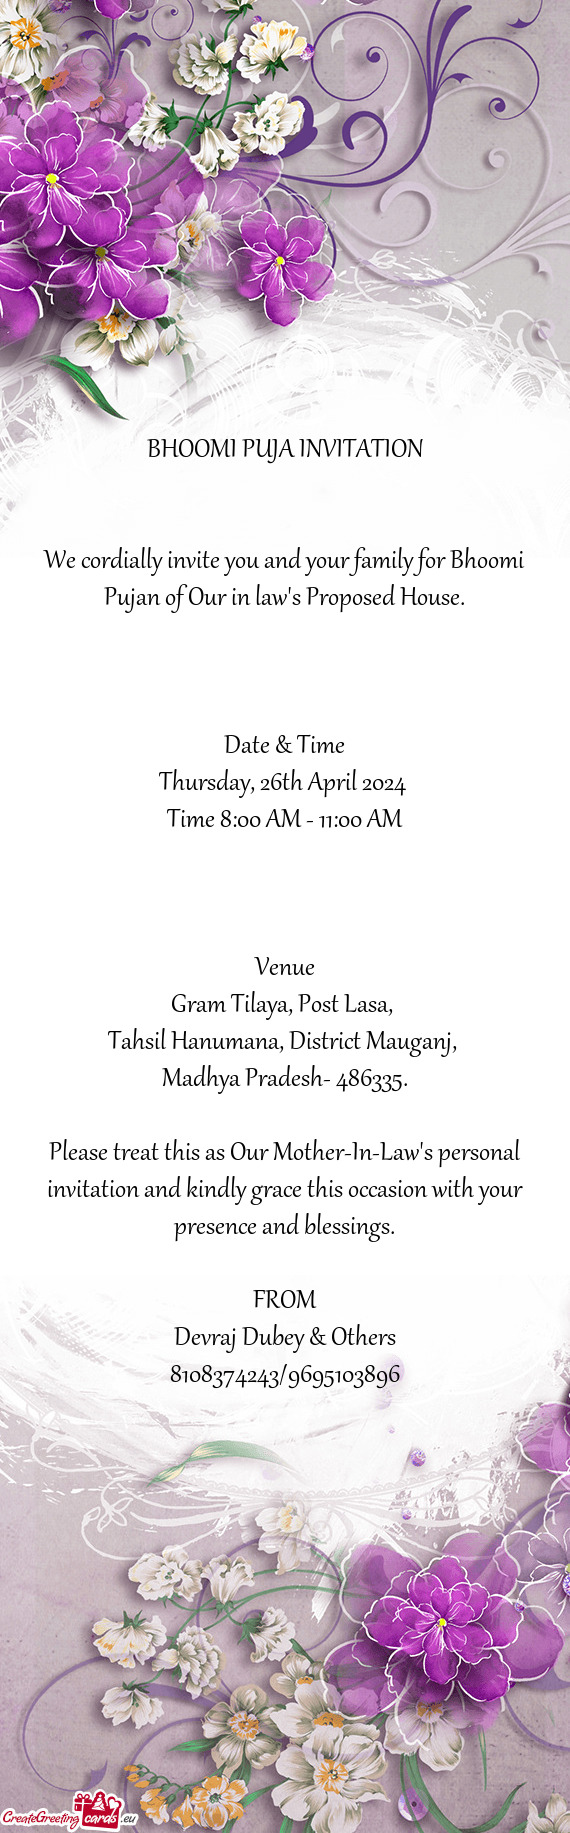 We cordially invite you and your family for Bhoomi Pujan of Our in law